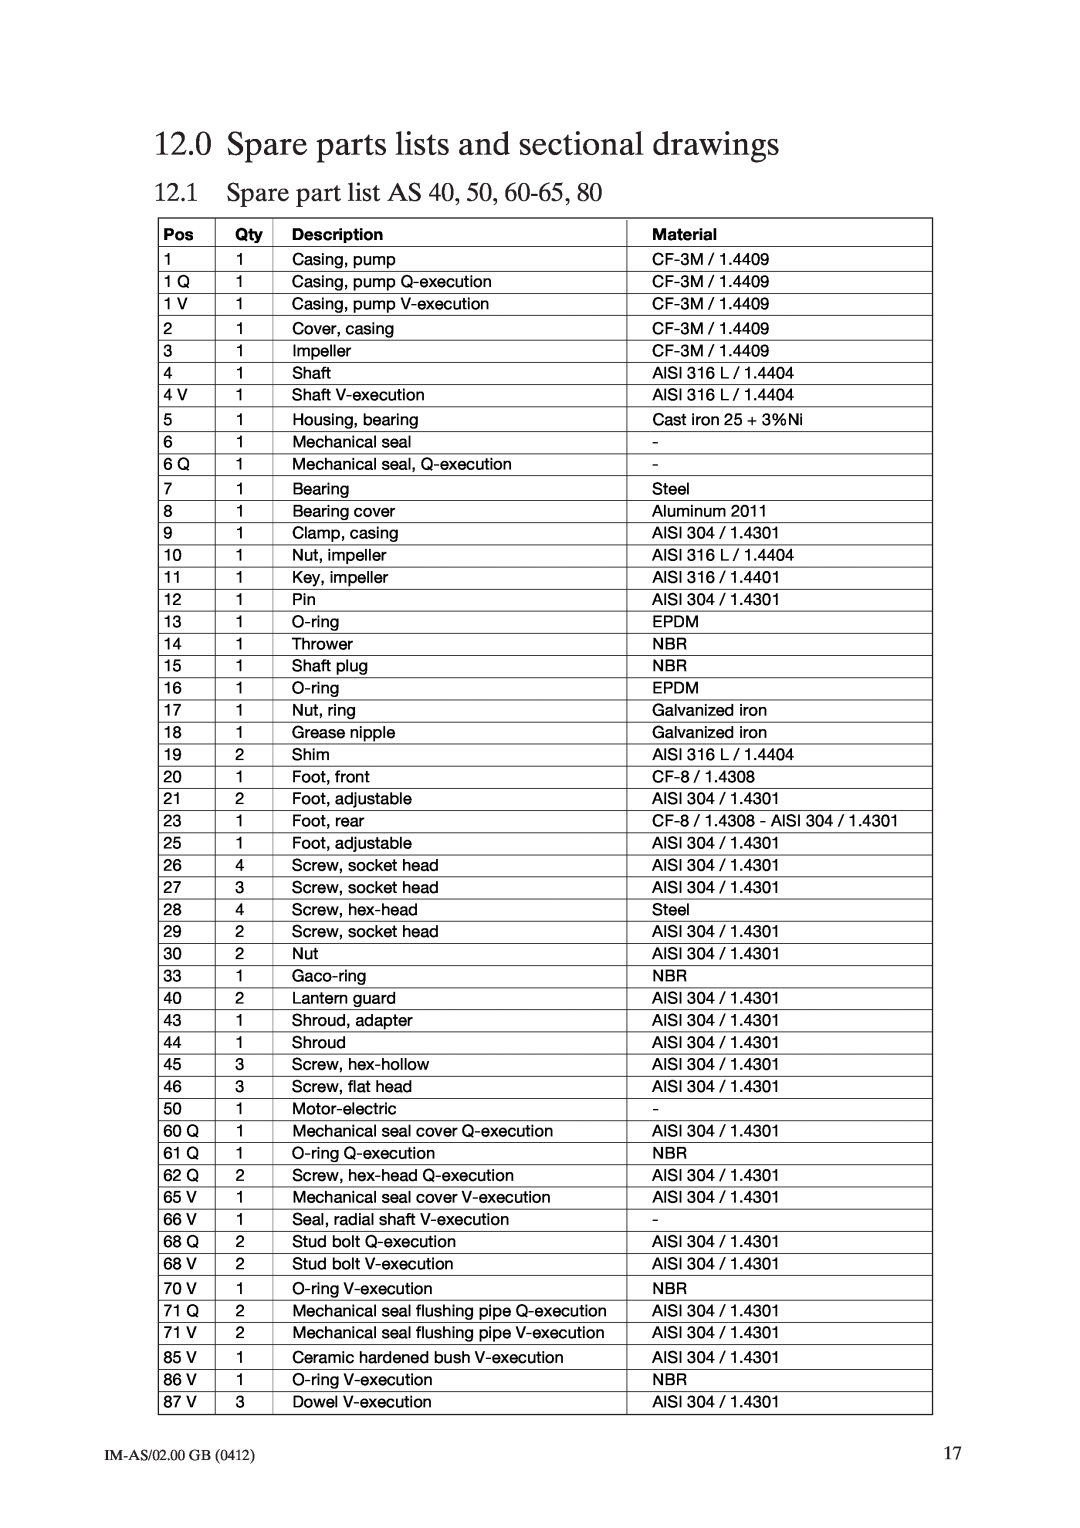 Johnson Controls 12.0Spare parts lists and sectional drawings, 12.1Spare part list AS 40, 50, 60-65,80, Description 